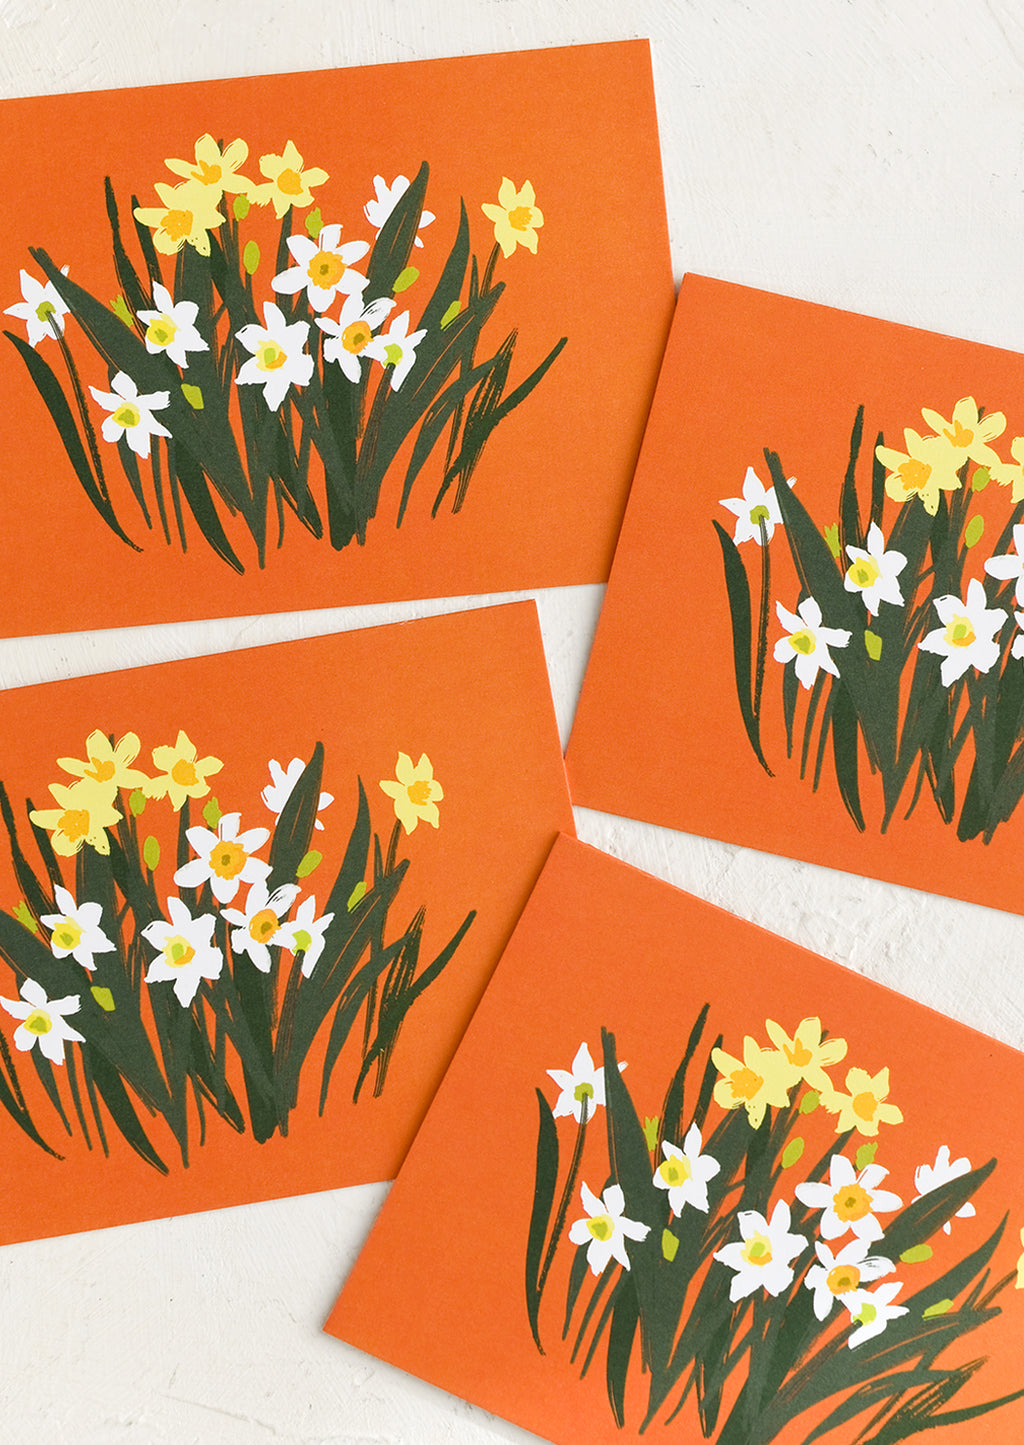 Paperwhites: A set of red paperwhite printed greeting cards.